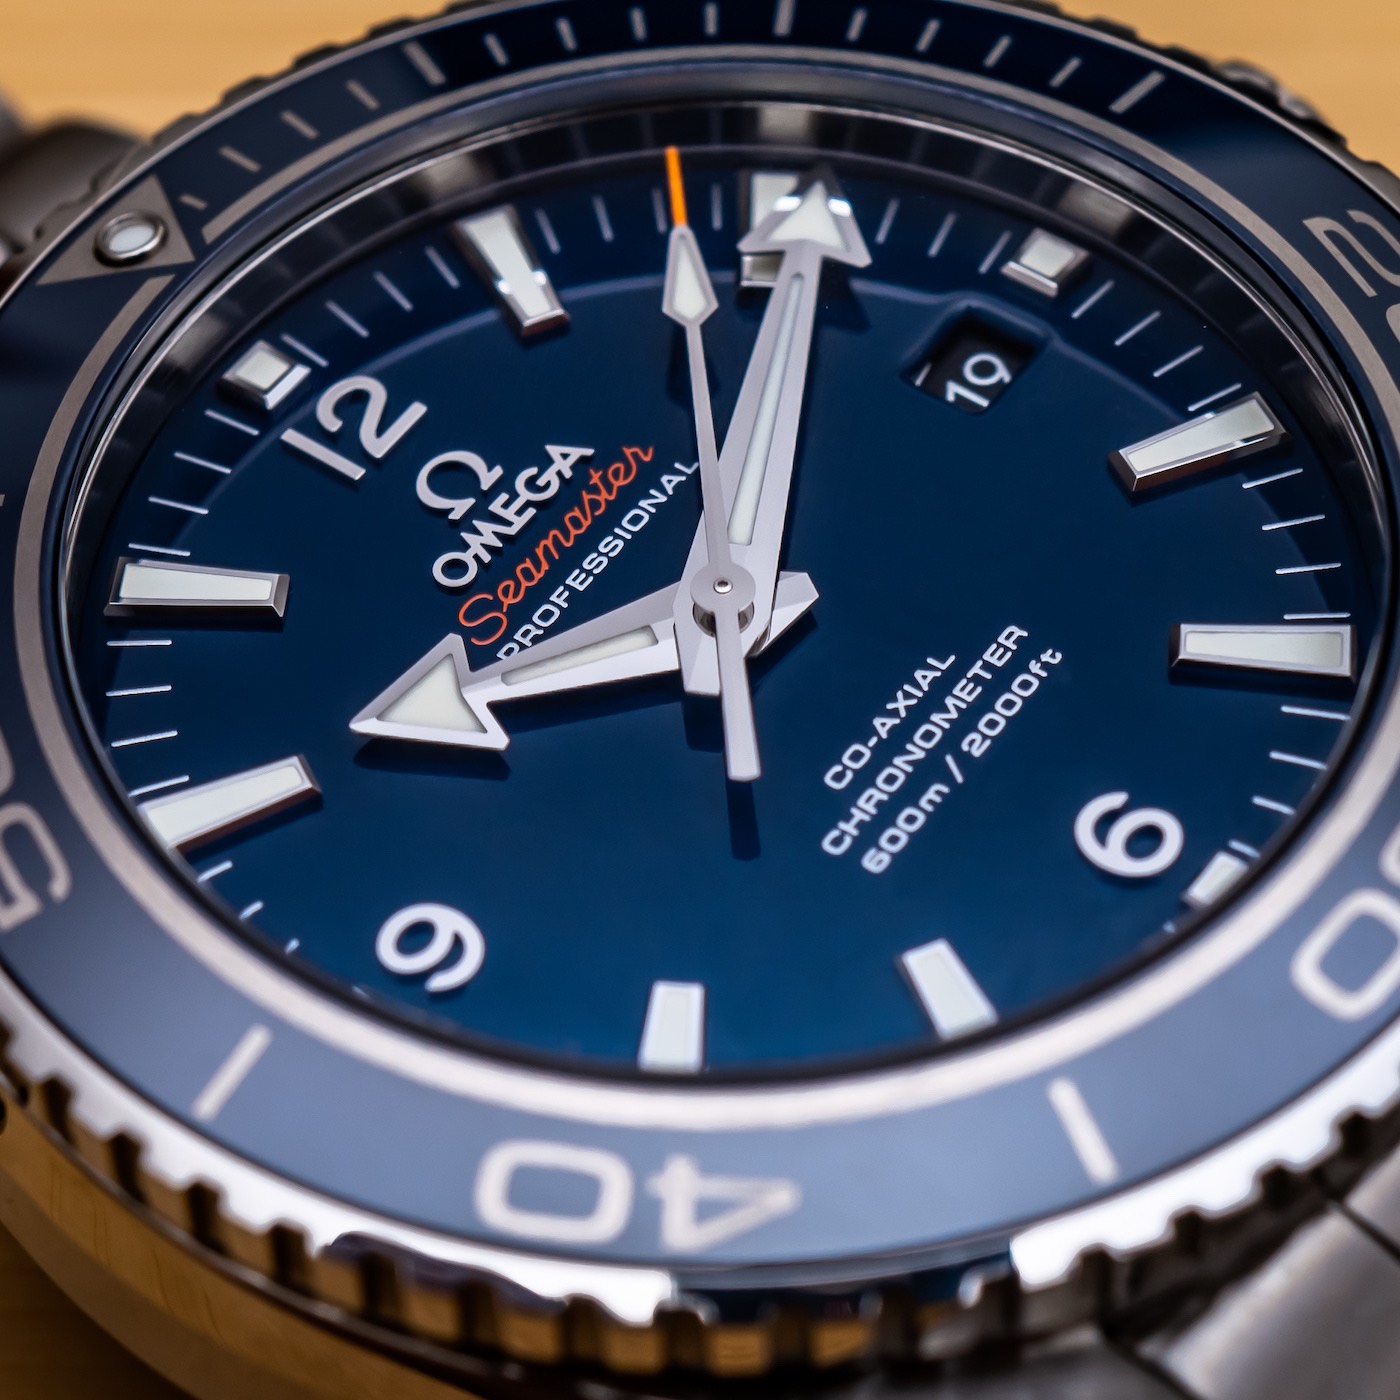 best price omega watches